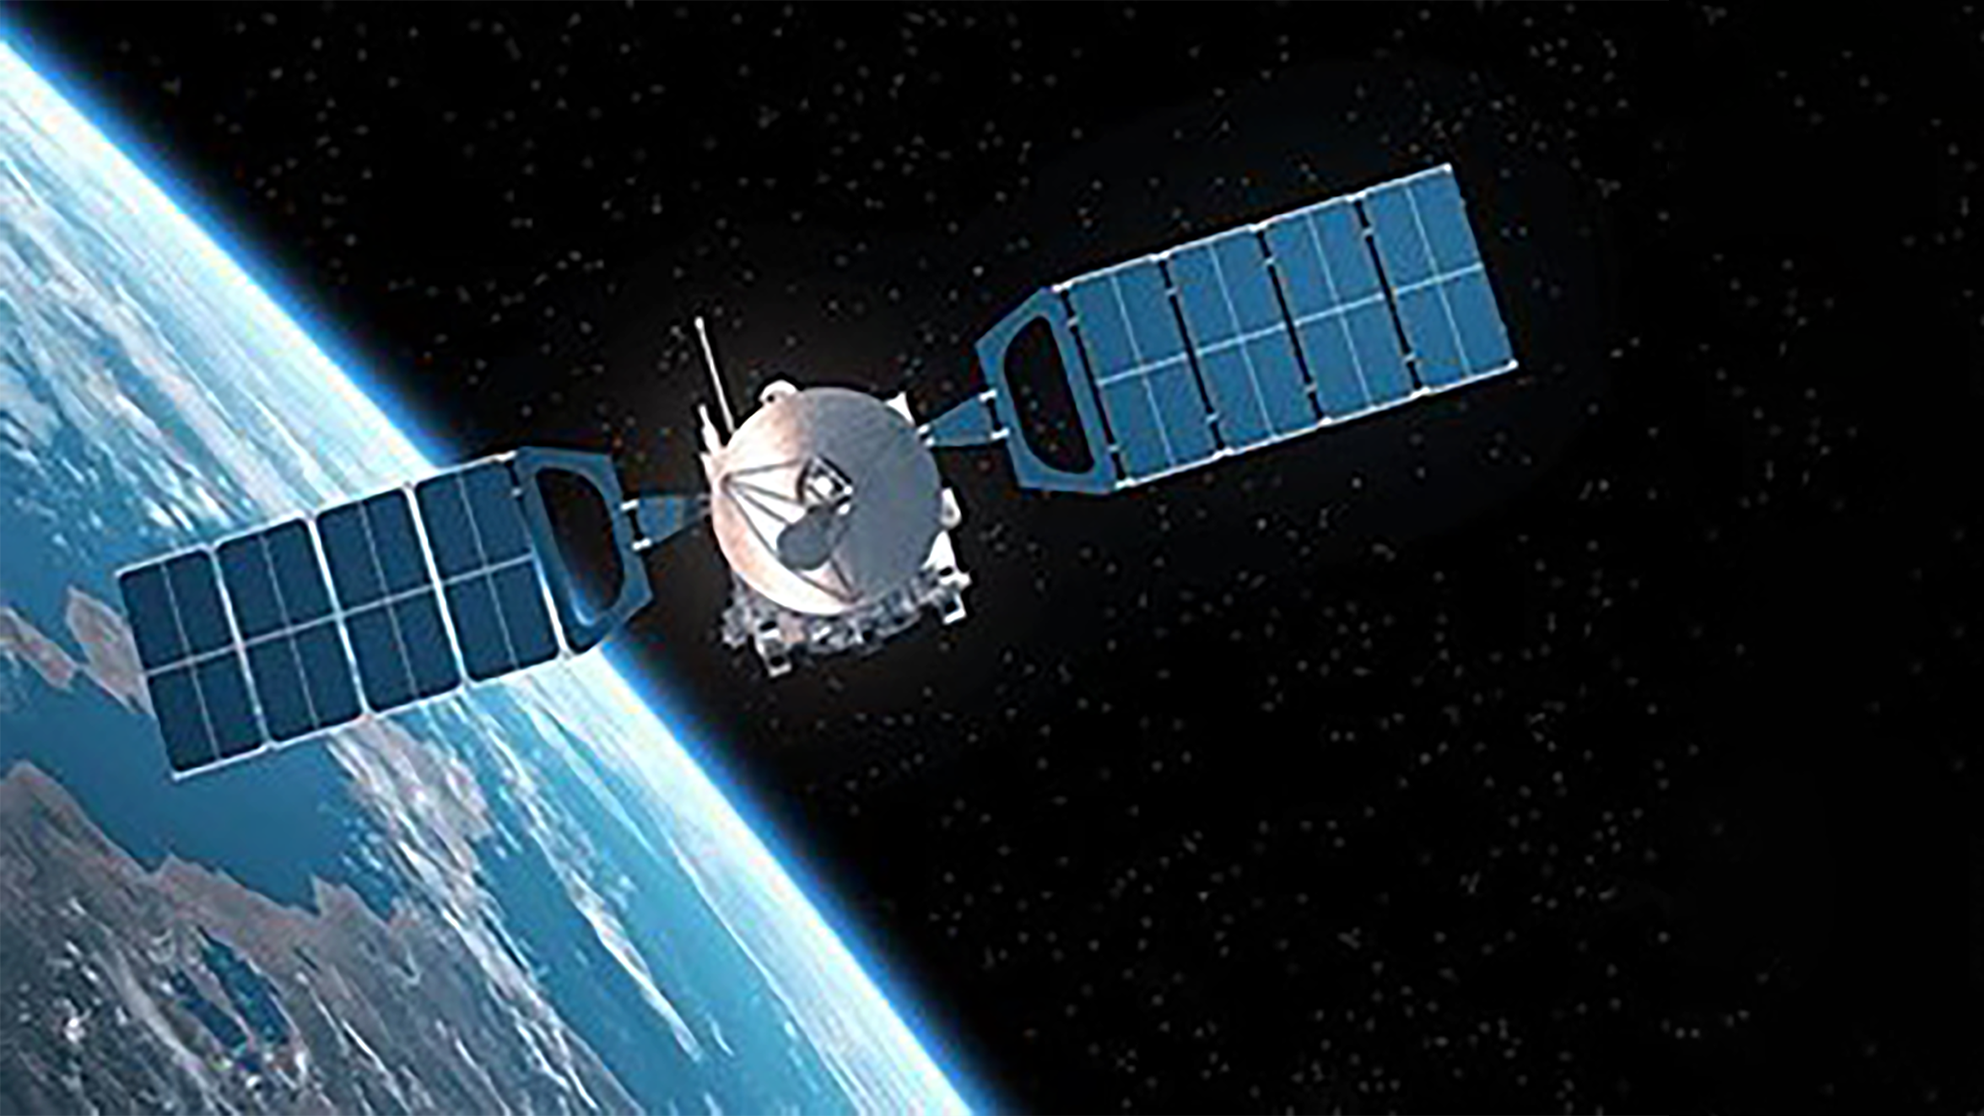 A graphic showing a satellite floating in space in Earth's orbit